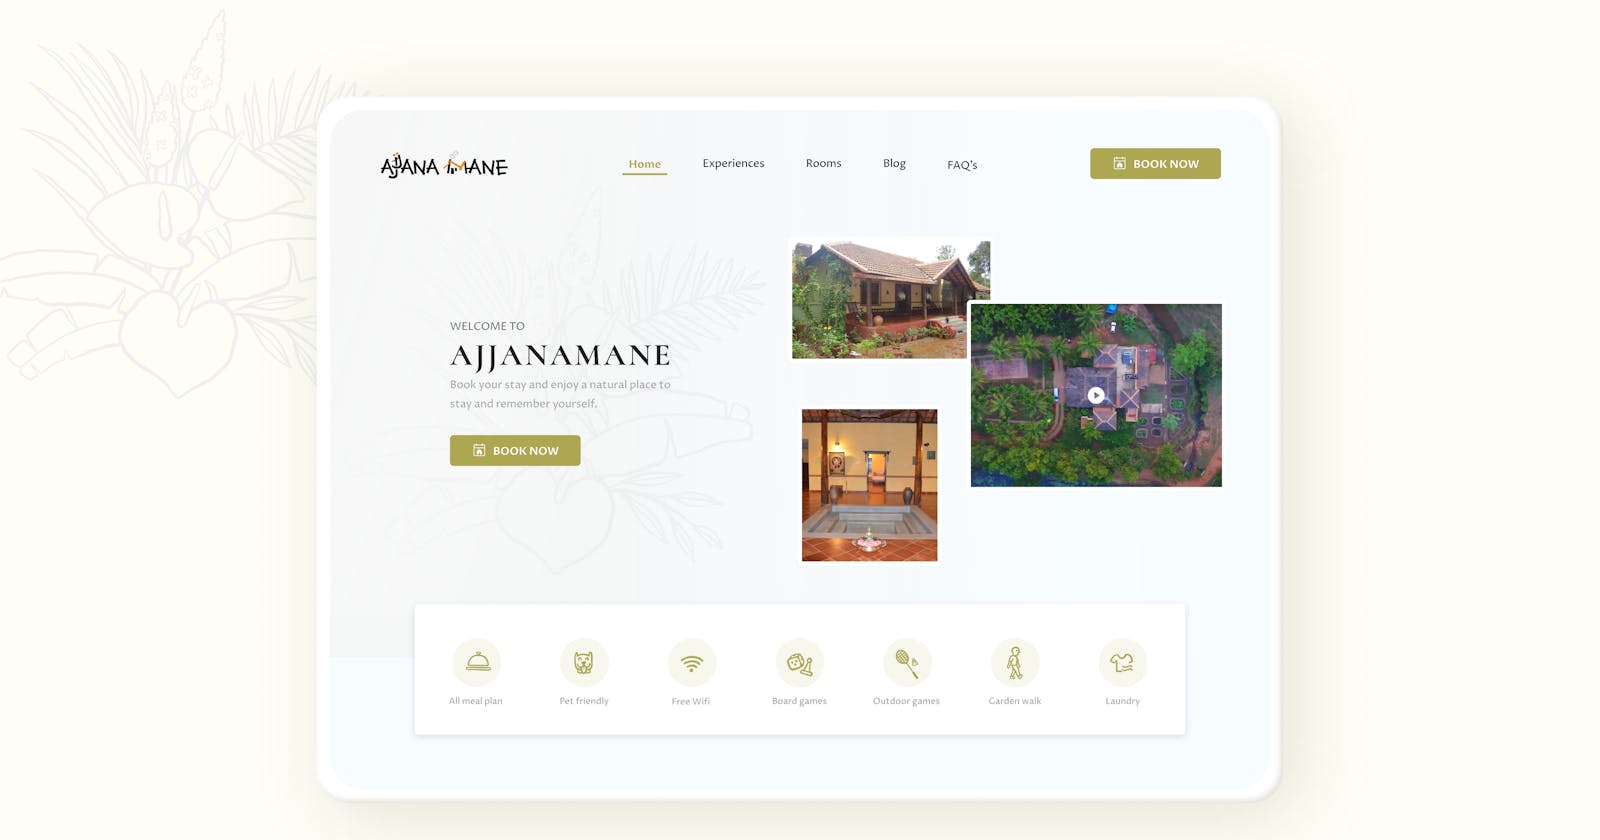 A new, contemporary look for a heritage homestay's website